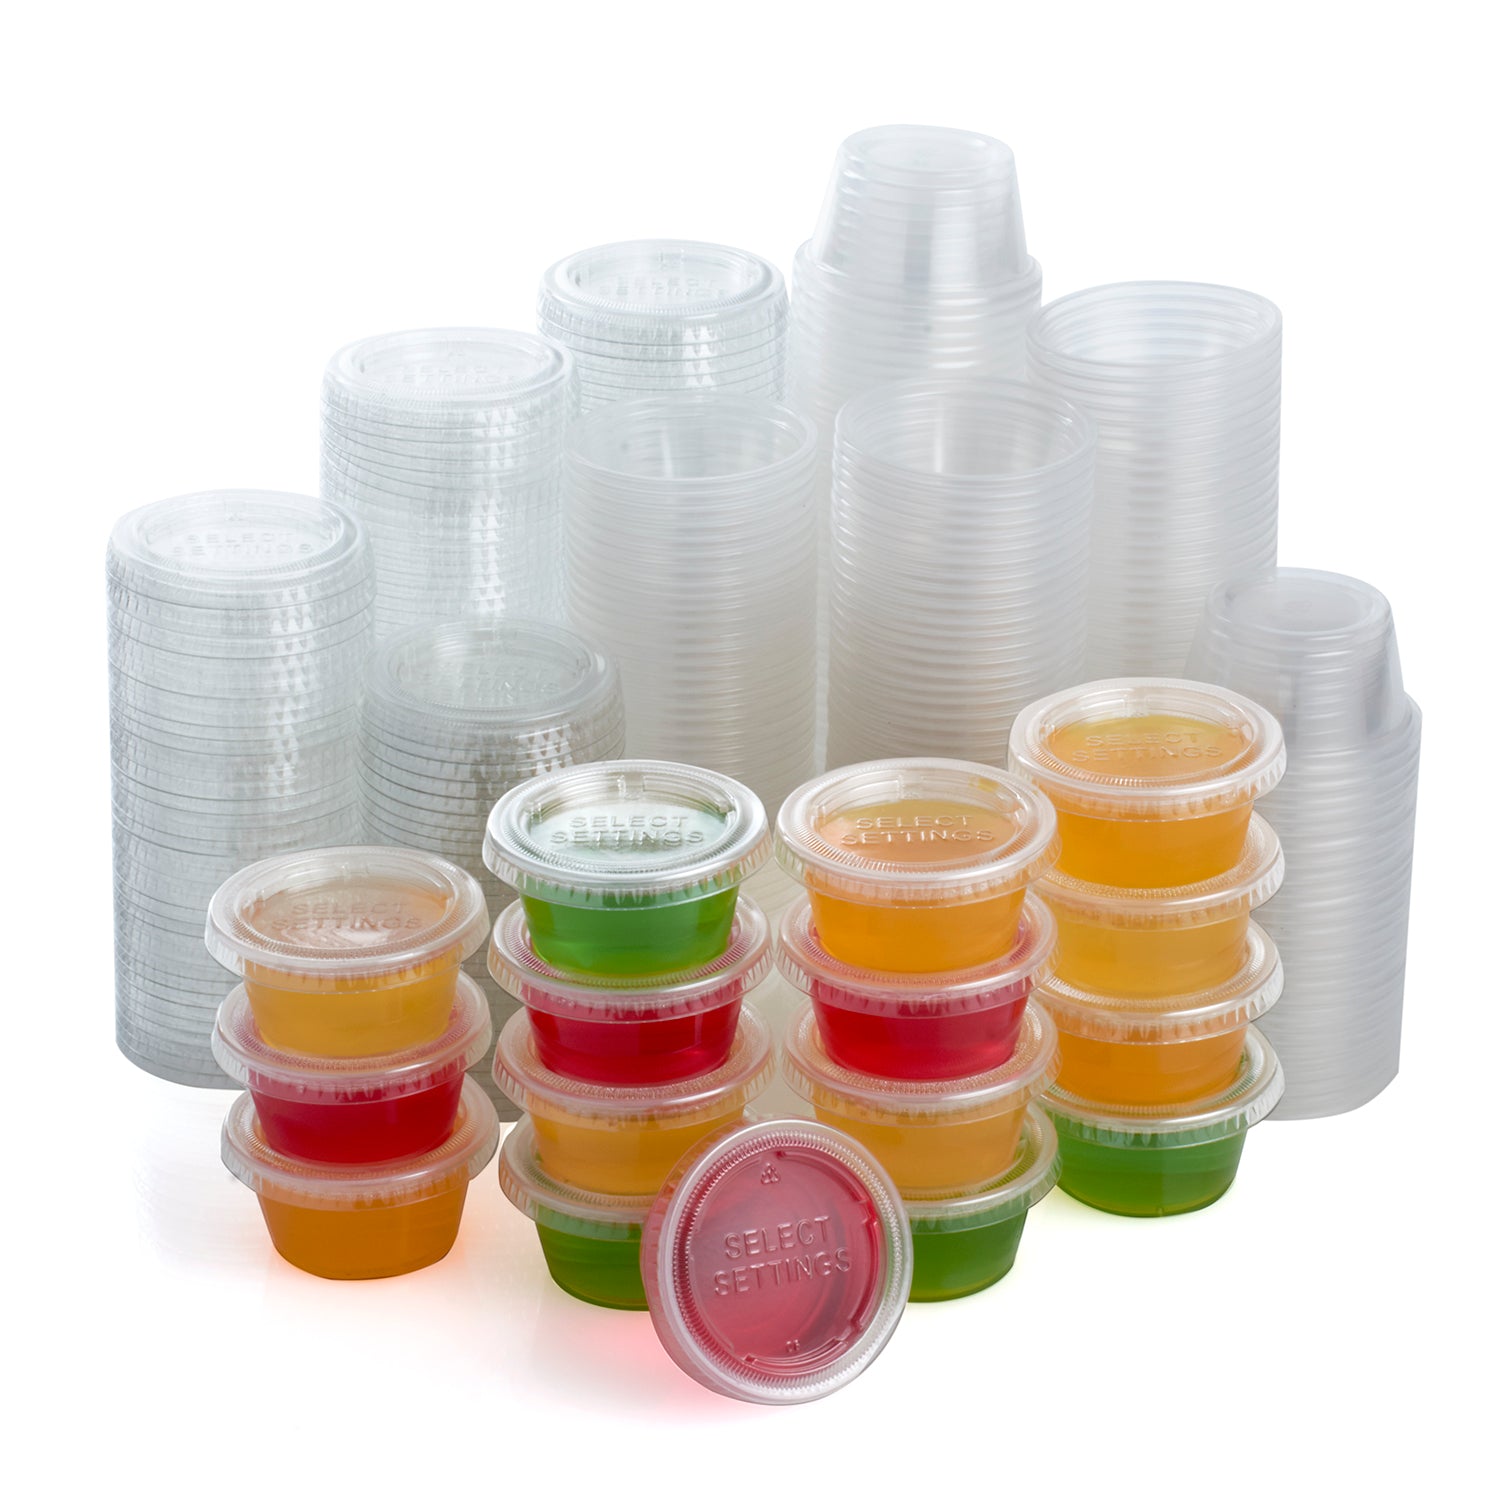 200 Sets - 2 oz. Small Plastic Containers with Lids, Jello Shot